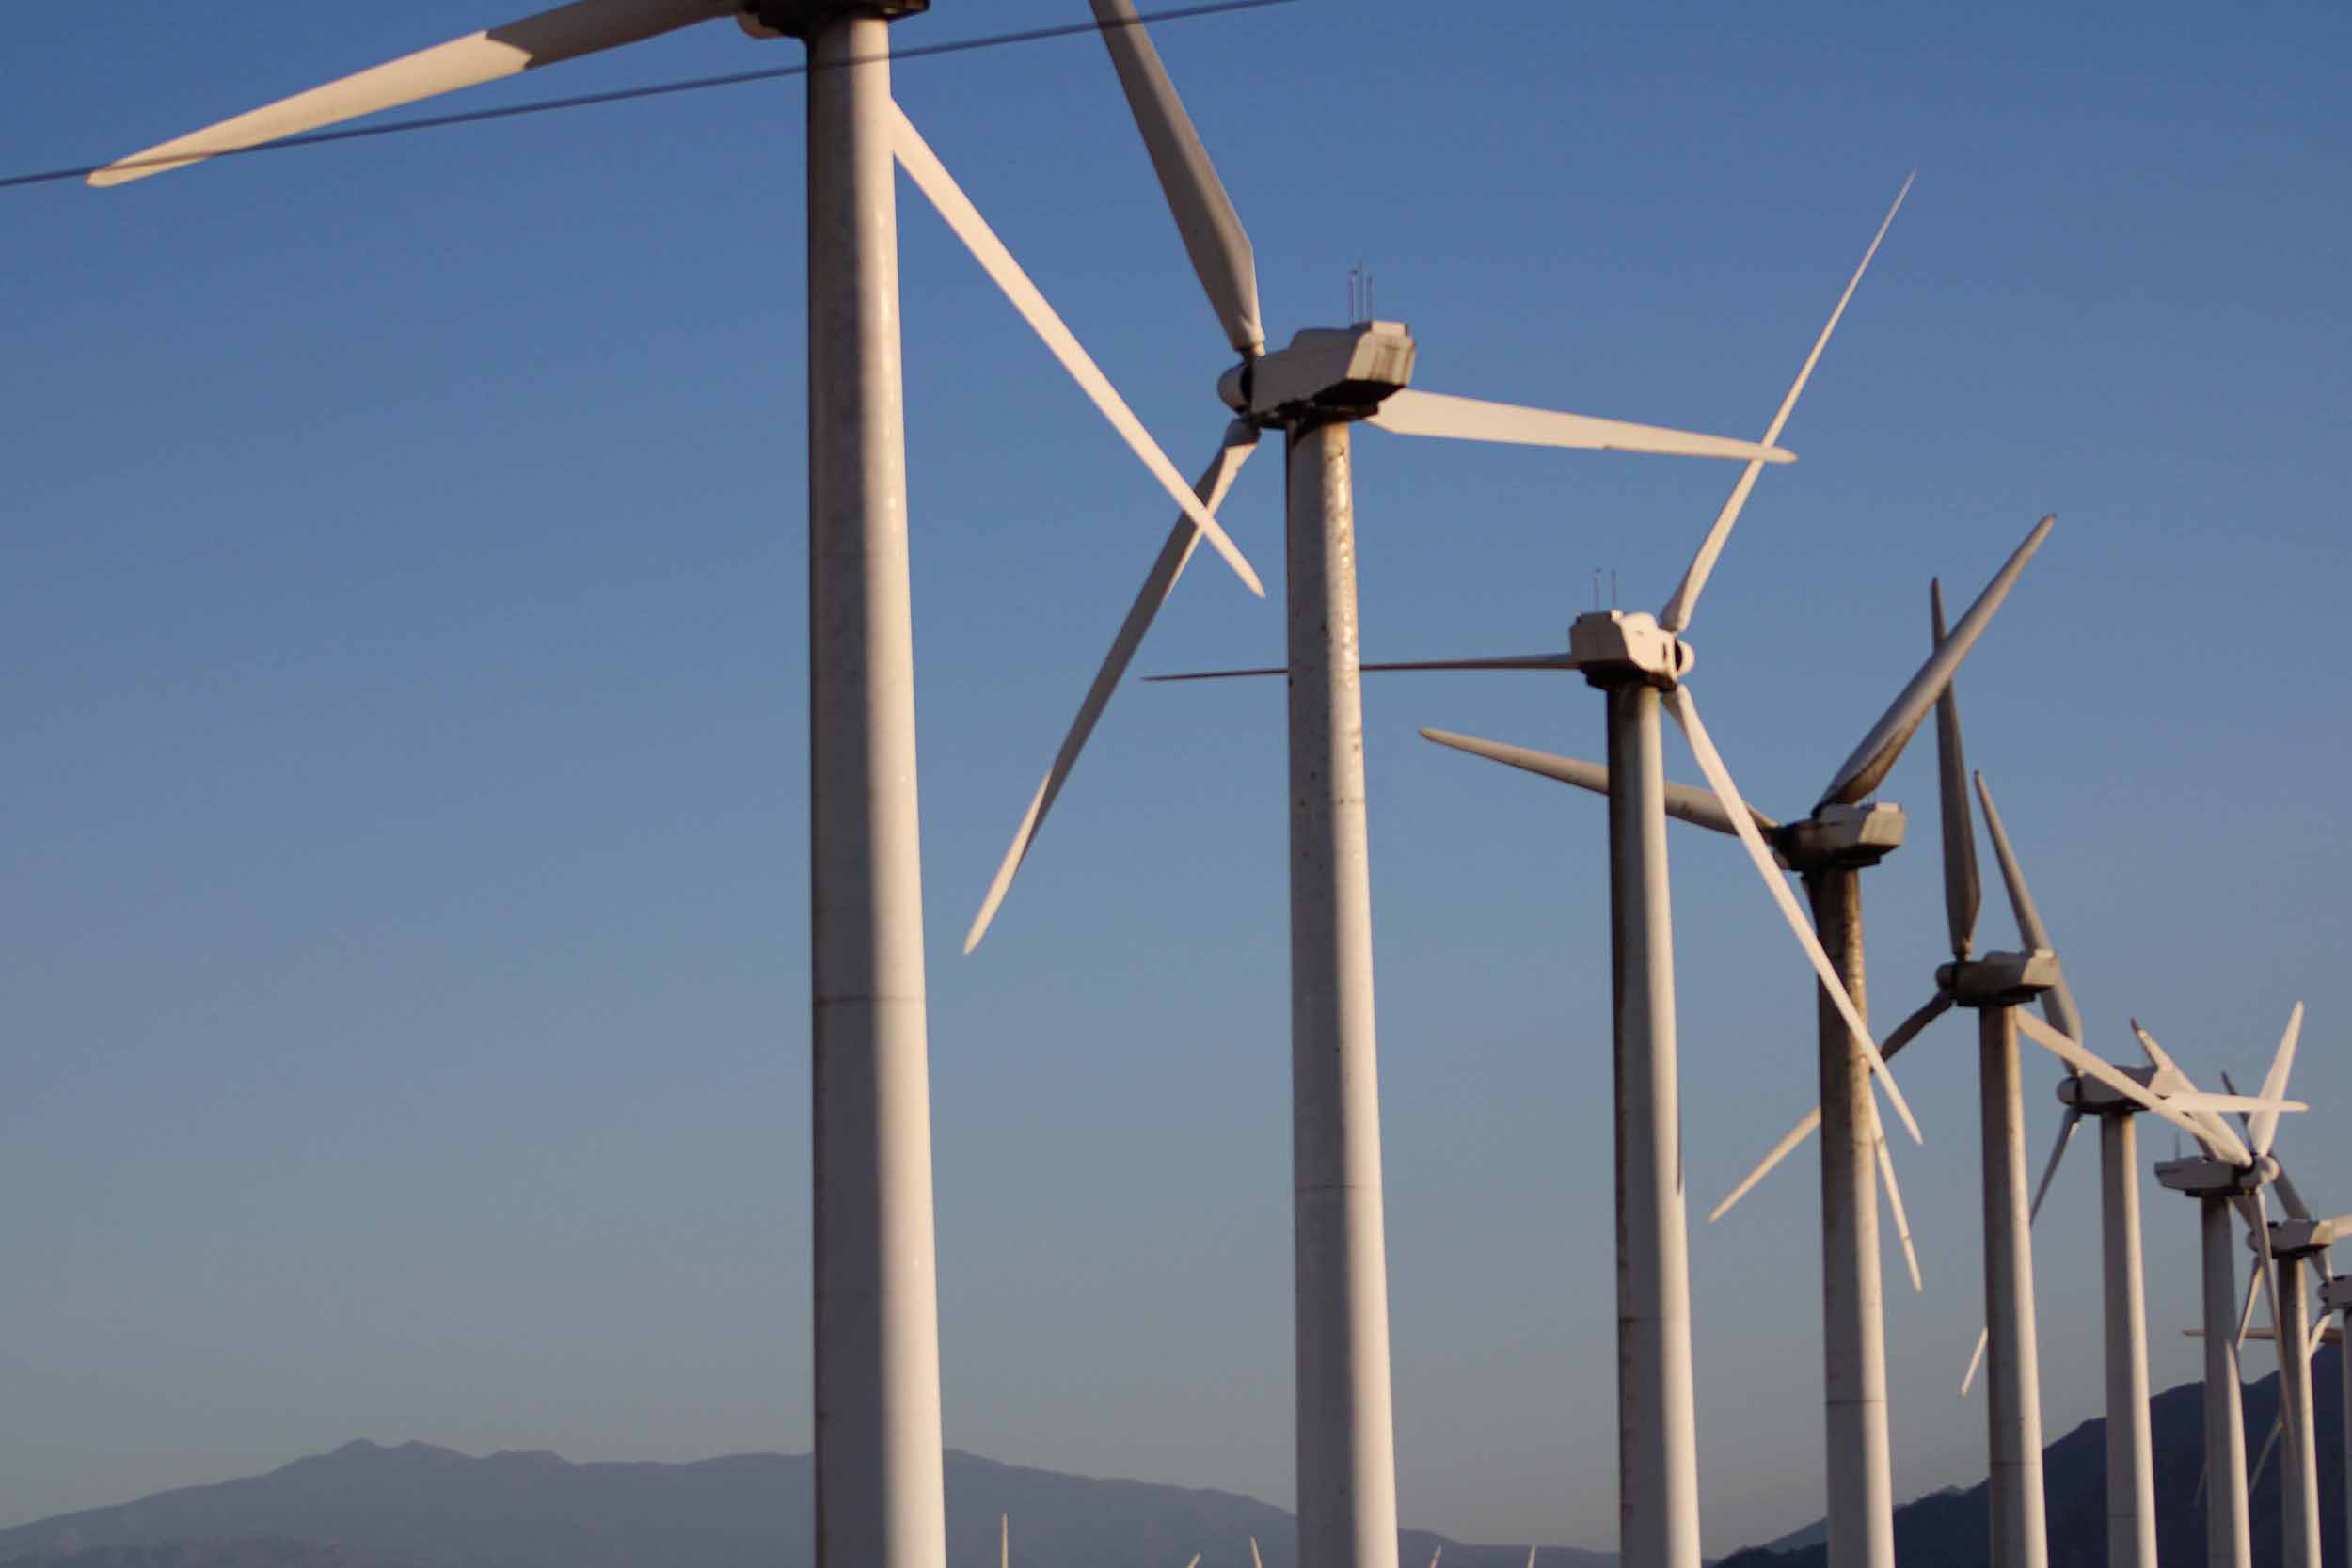 row of windmills on a wind farm against a blue sky with mountains in the background